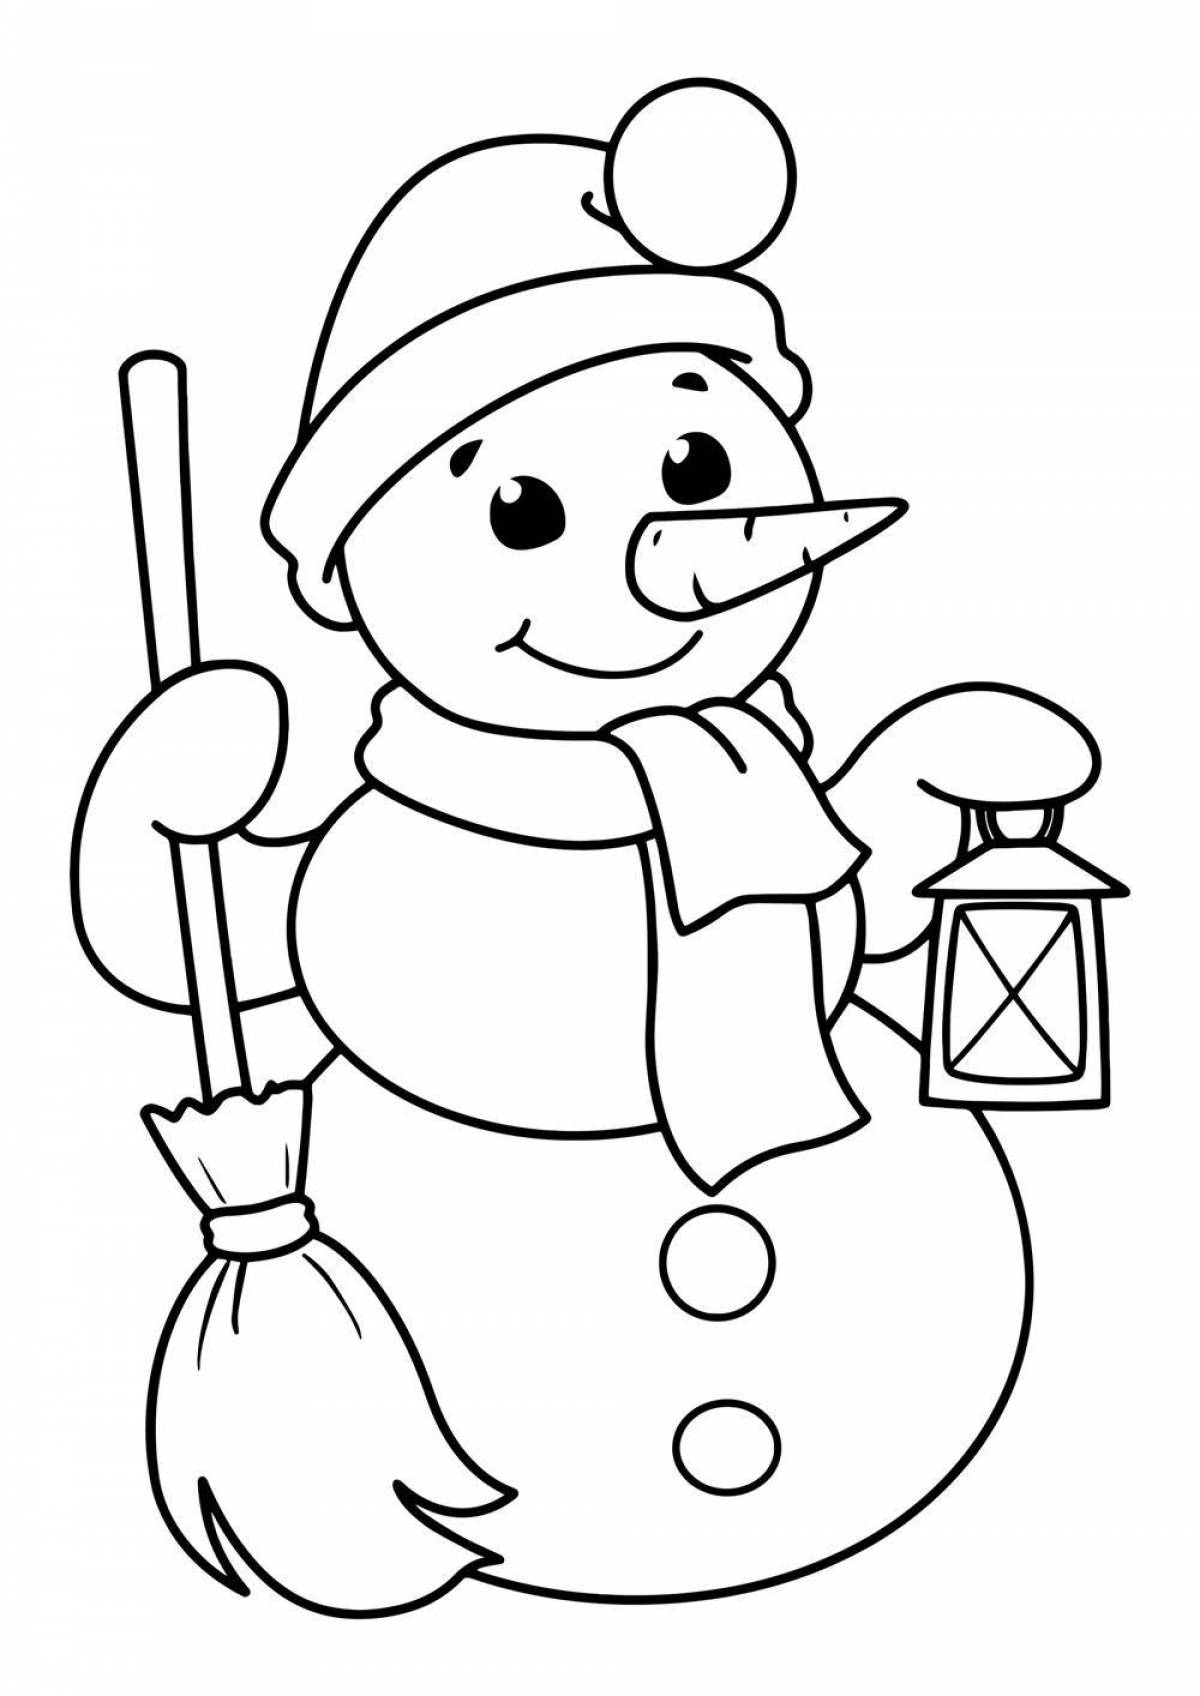 Creative Christmas coloring book for kids 3-4 years old